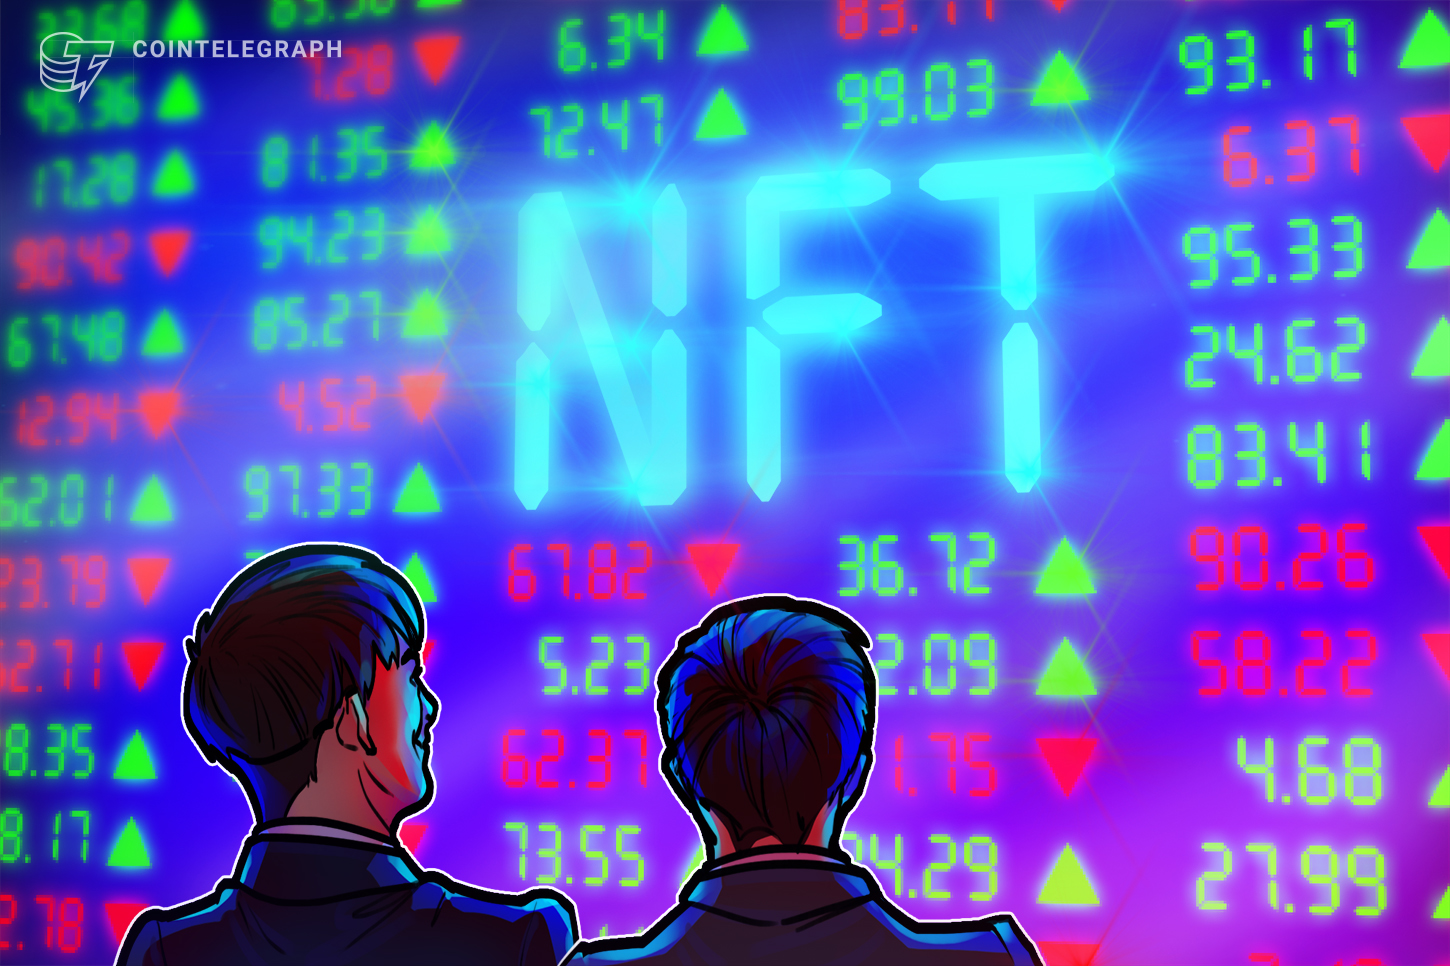 Here’s-why-blue-chip-nft-prices-continue-to-soar-nearly-a-week-after-the-otherside-mint